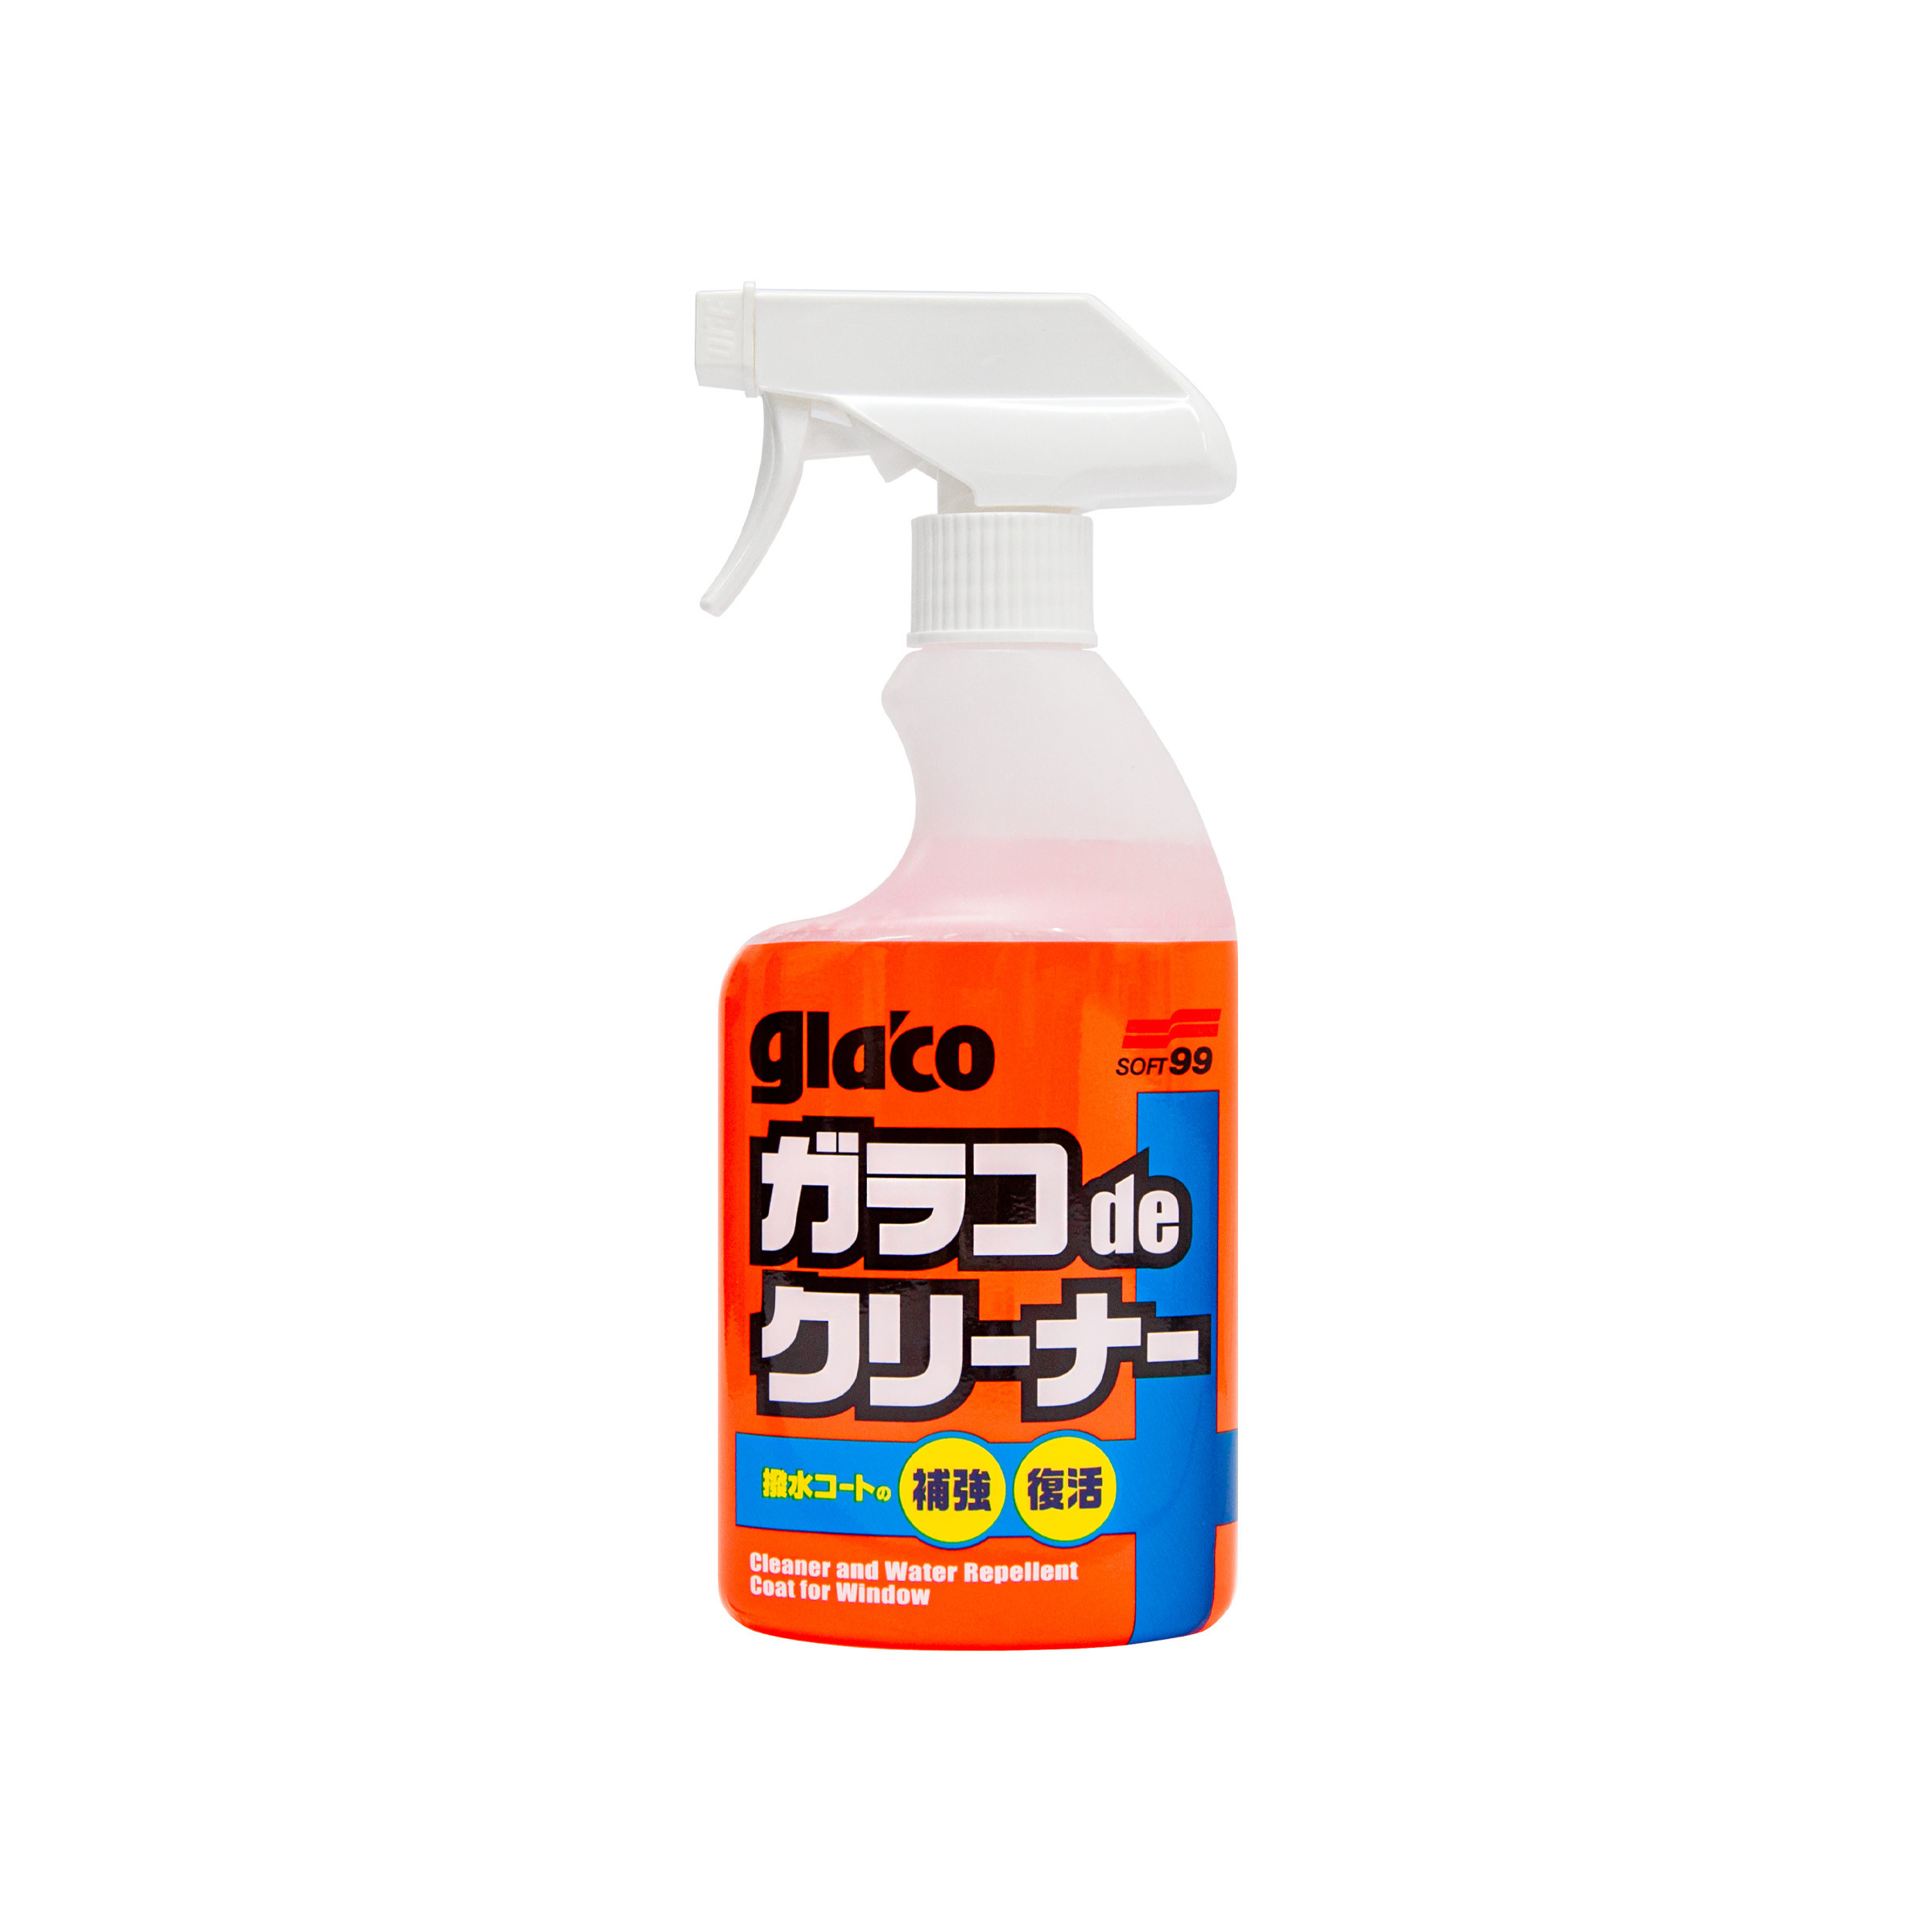 Glaco De Cleaner, glass cleaner and Glaco booster, 400 ml